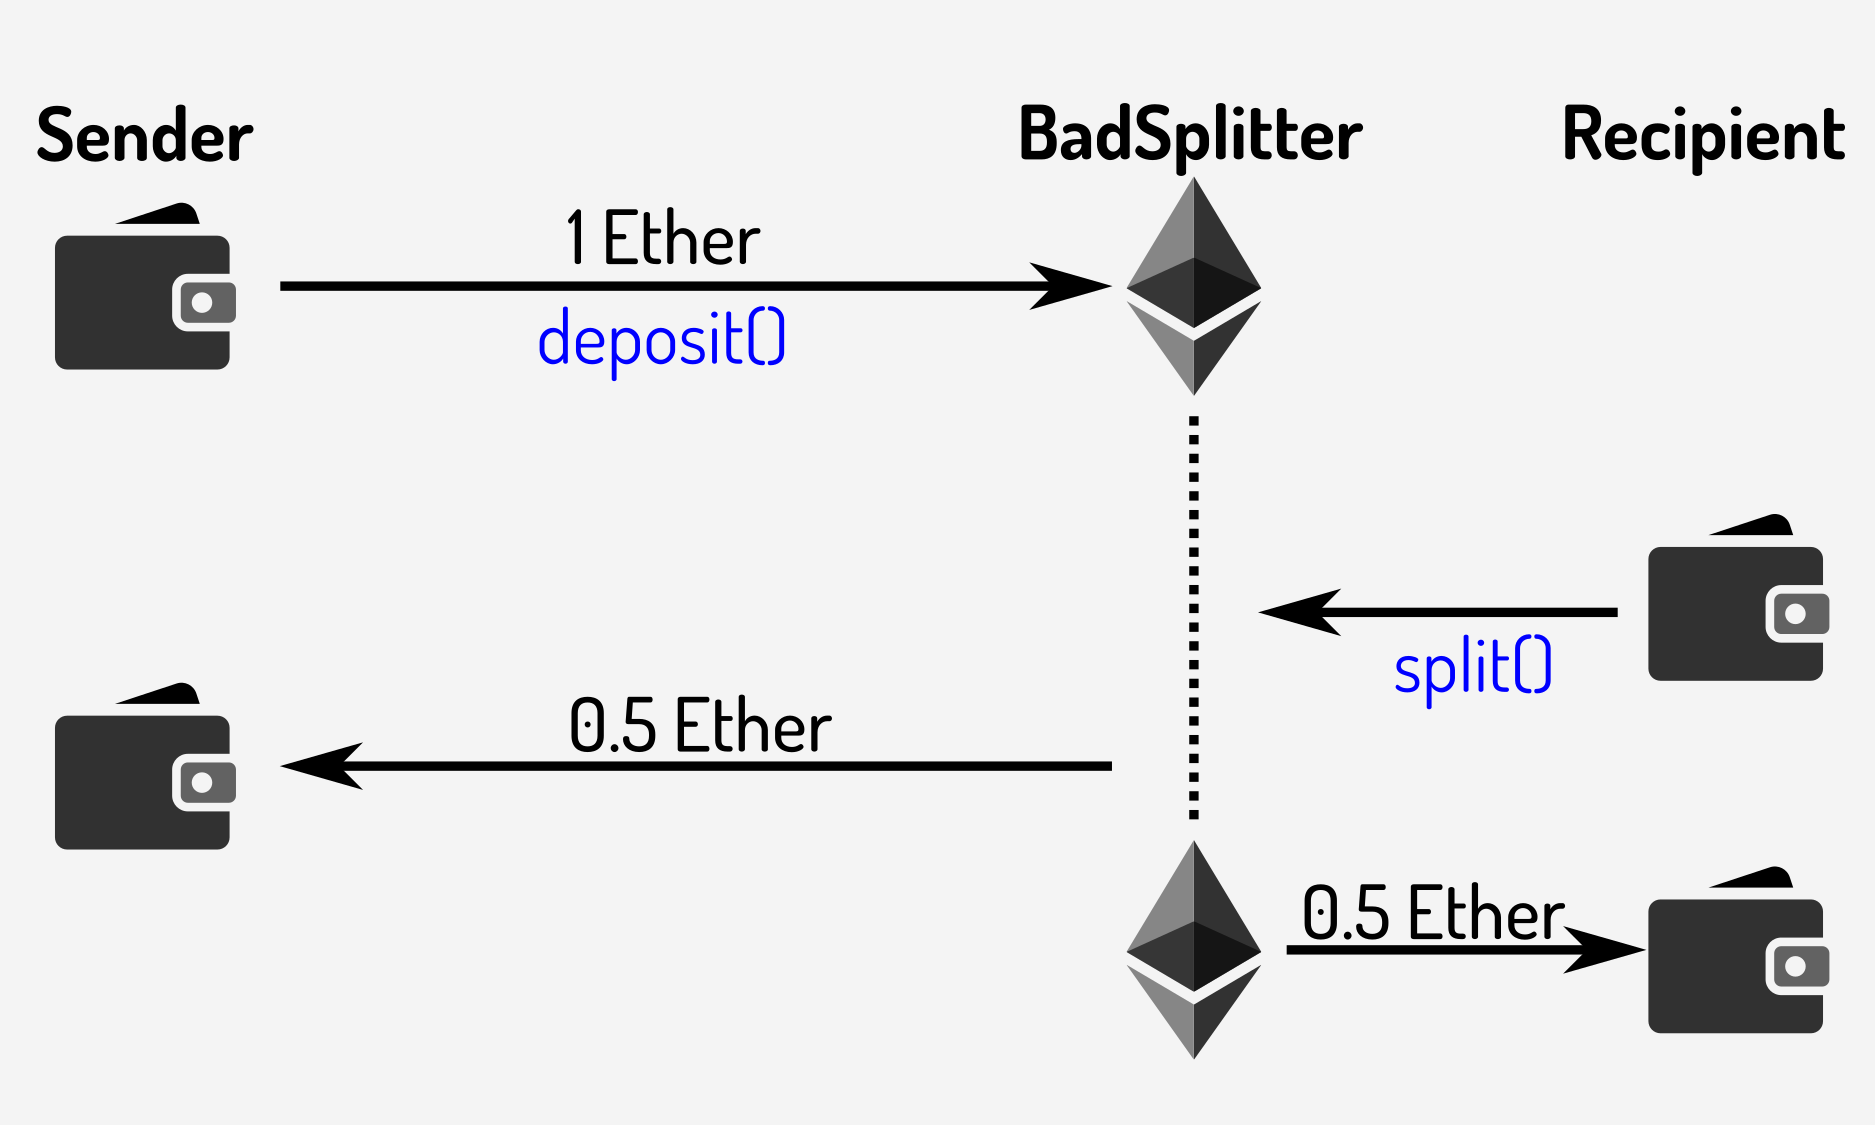 Expected operation of the BadSplitter contract